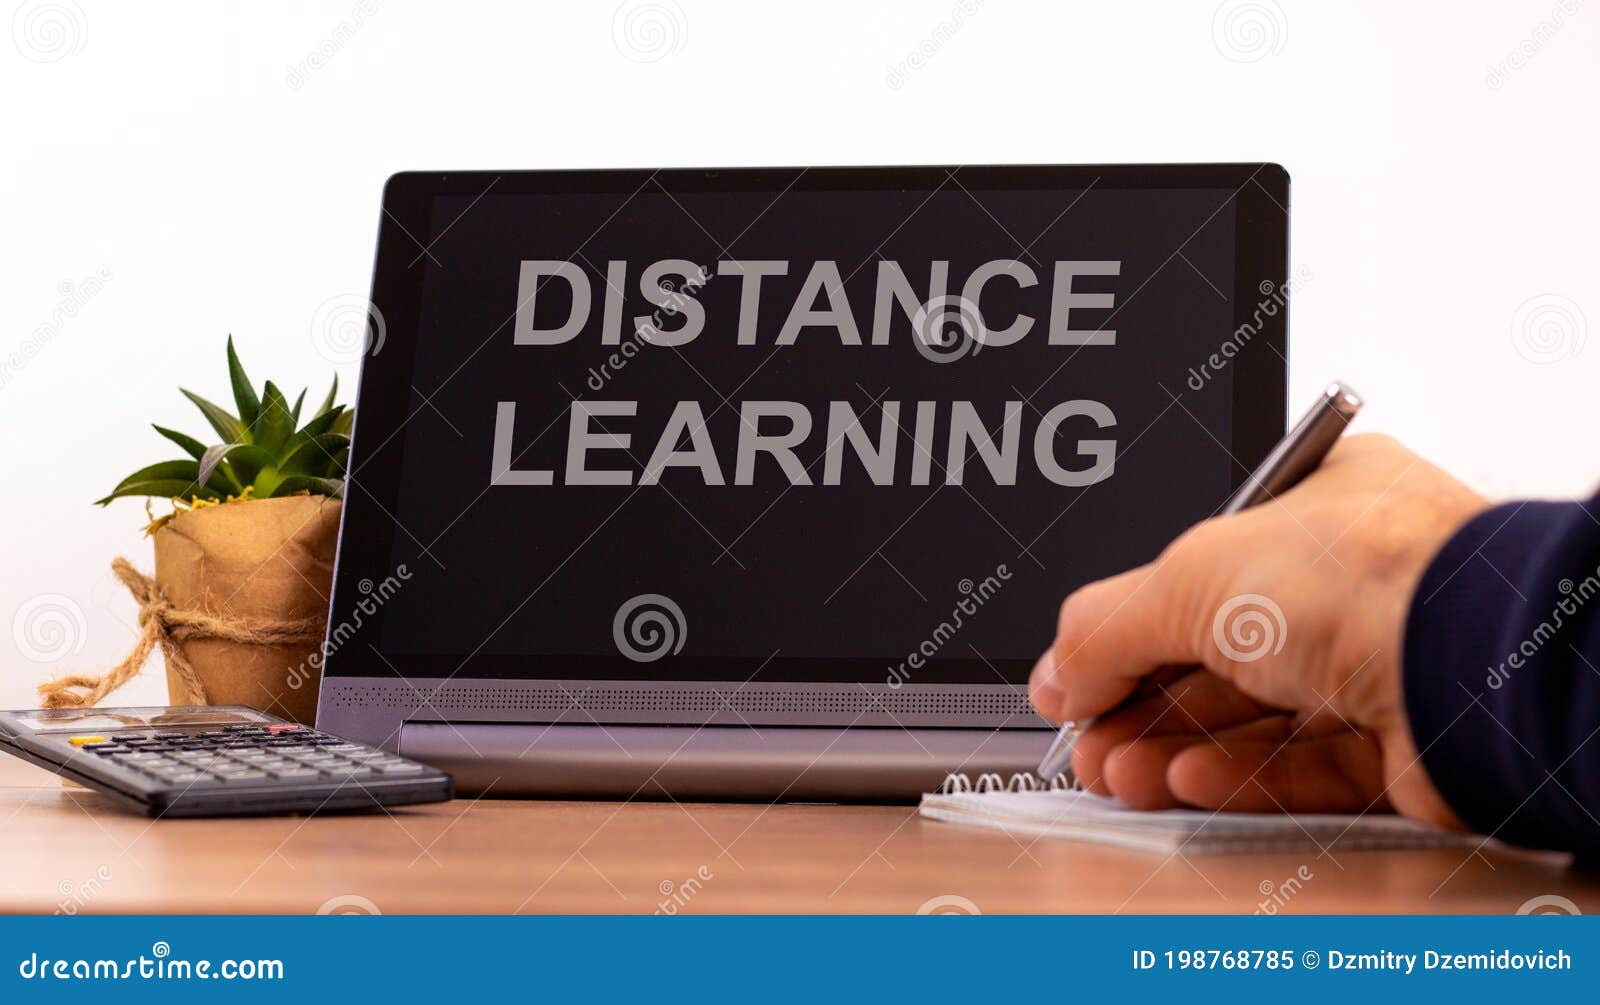 education concept. tablet with text `distance learning`. online education during covid-19 quarantine. male hand with pen,